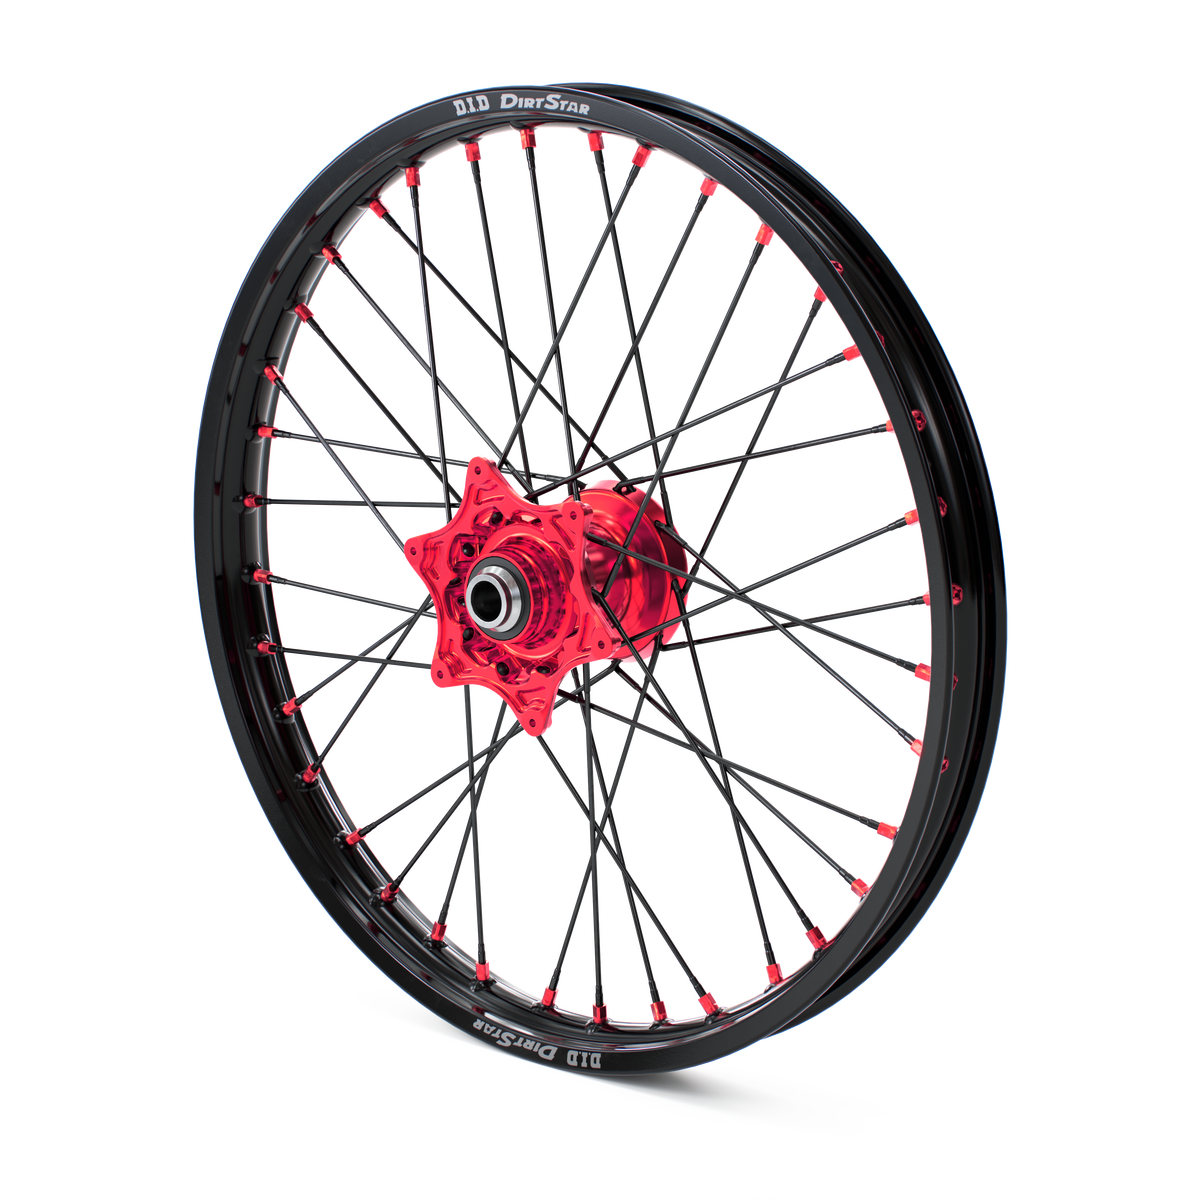 FACTORY FRONT WHEEL 1.6X21"